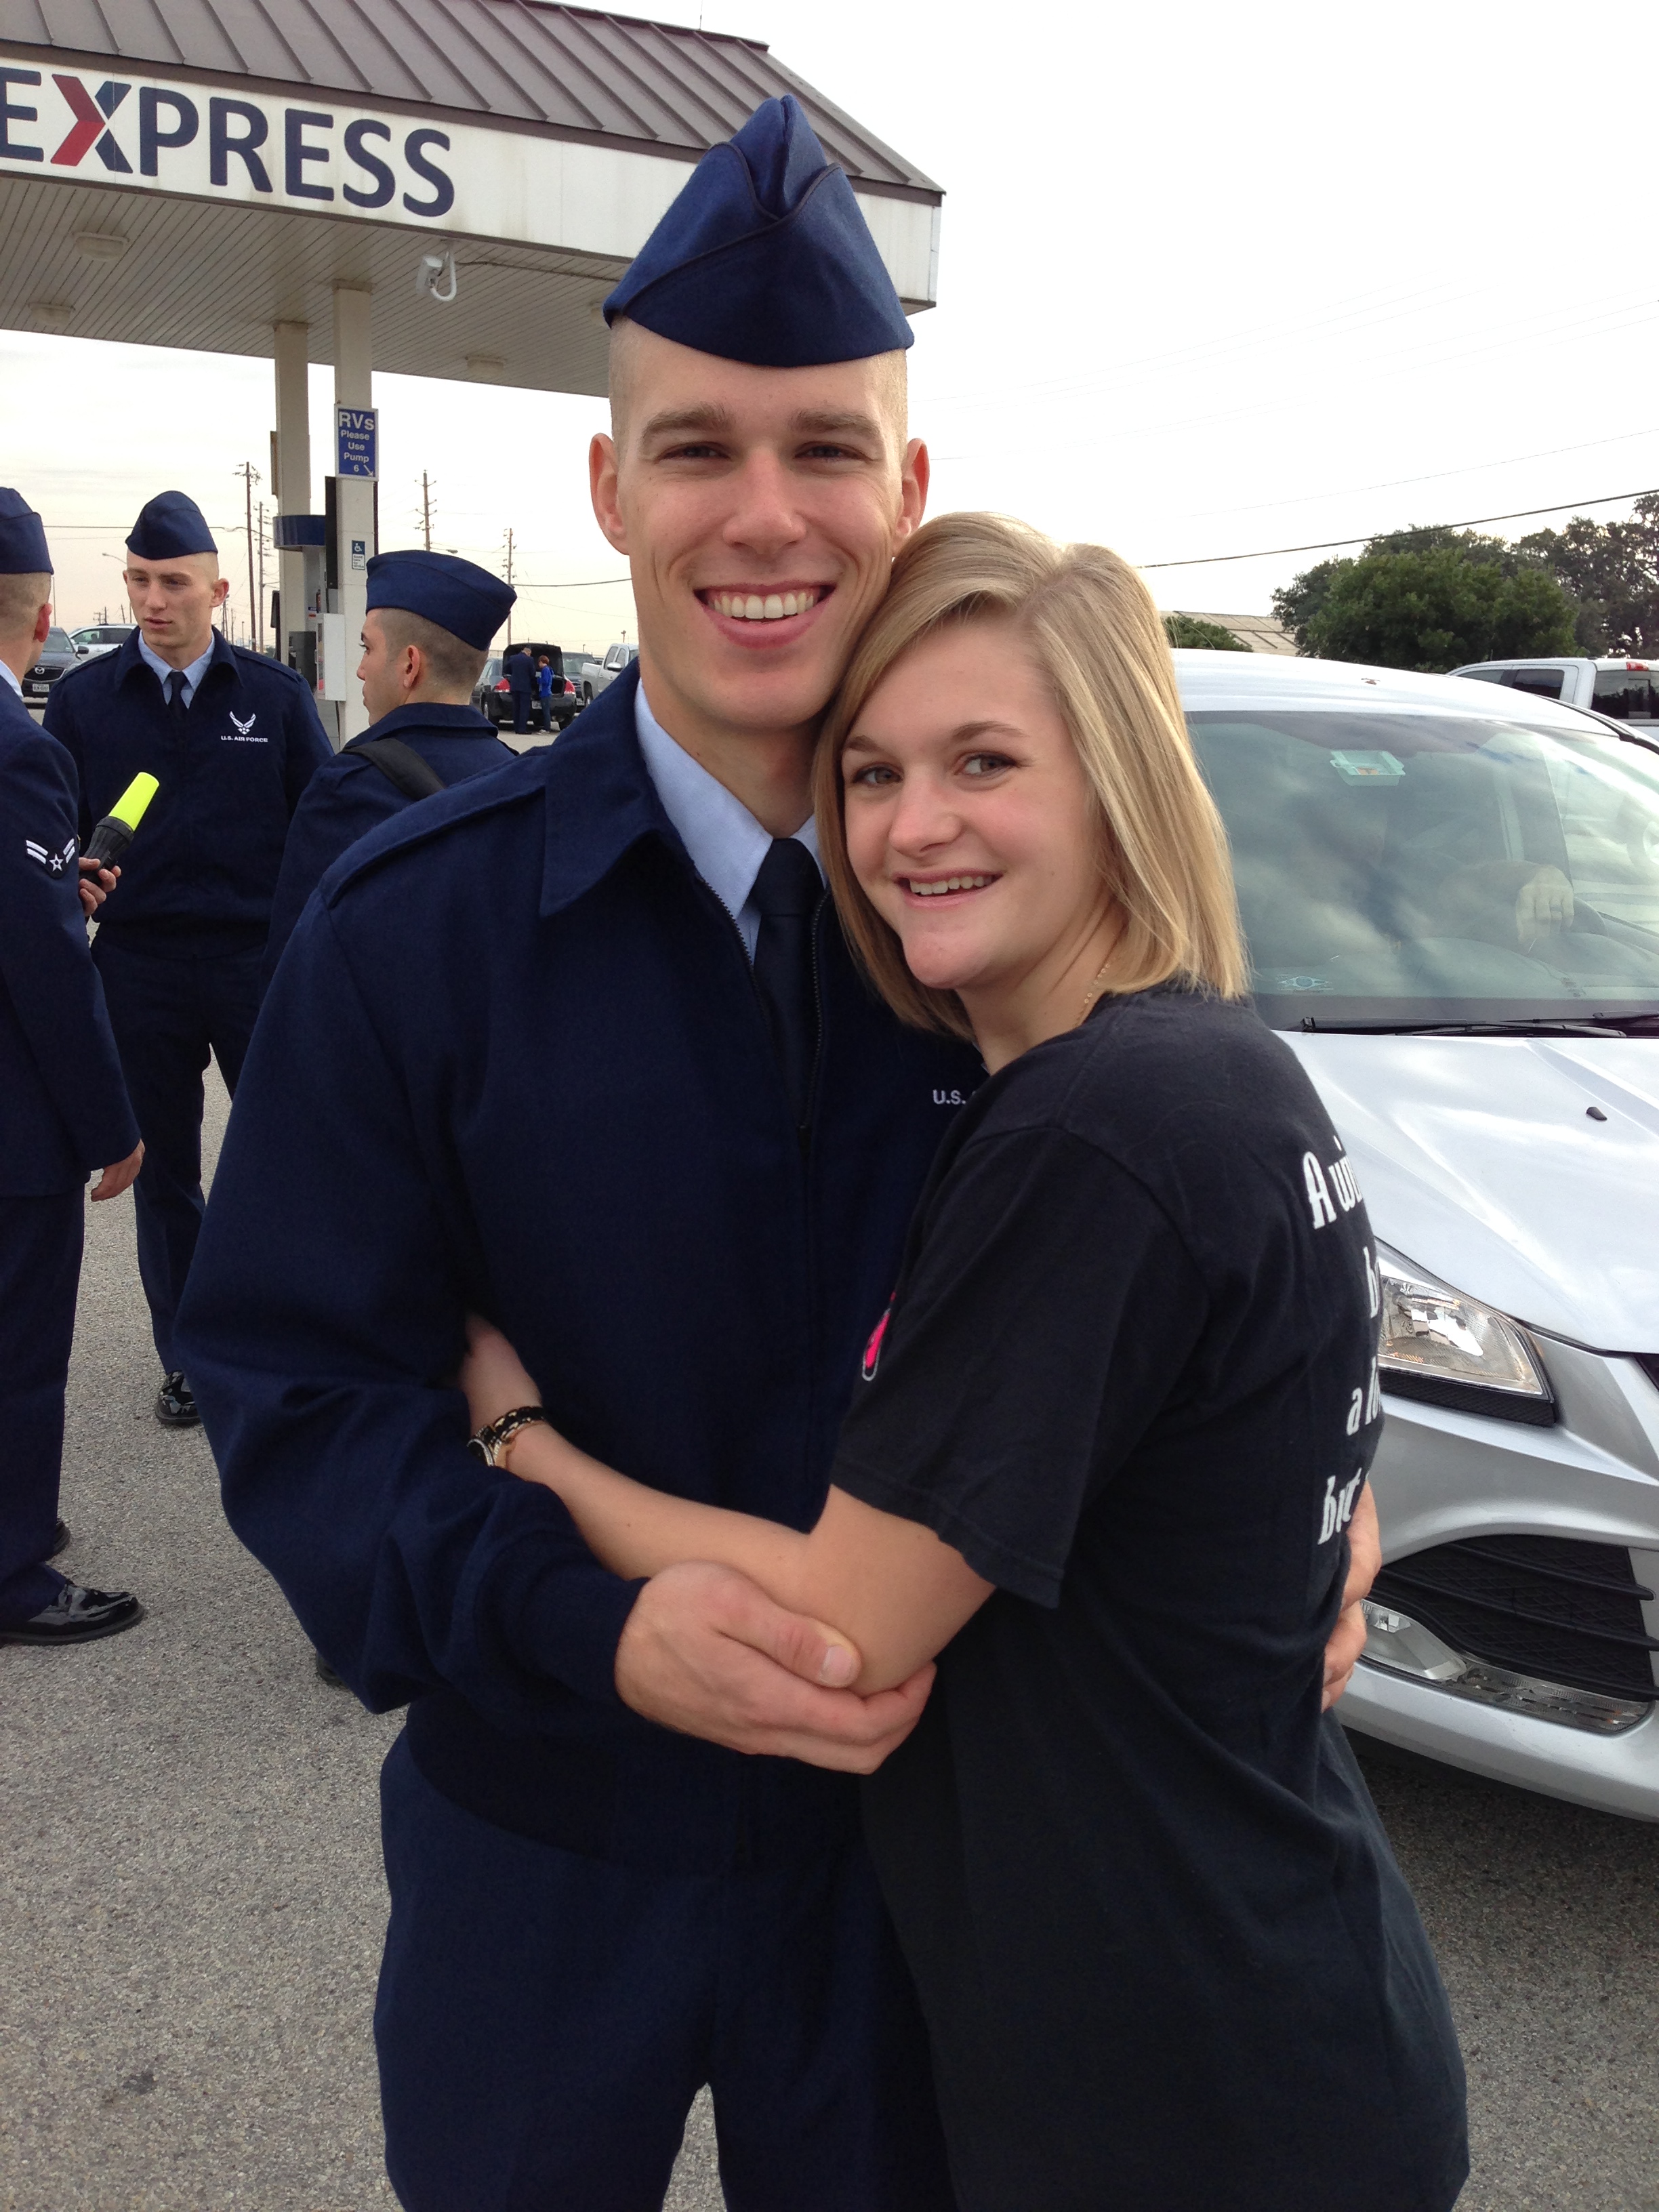 My Hero and my fiancé! Taylor Gum training to be a para rescuer - Rachel